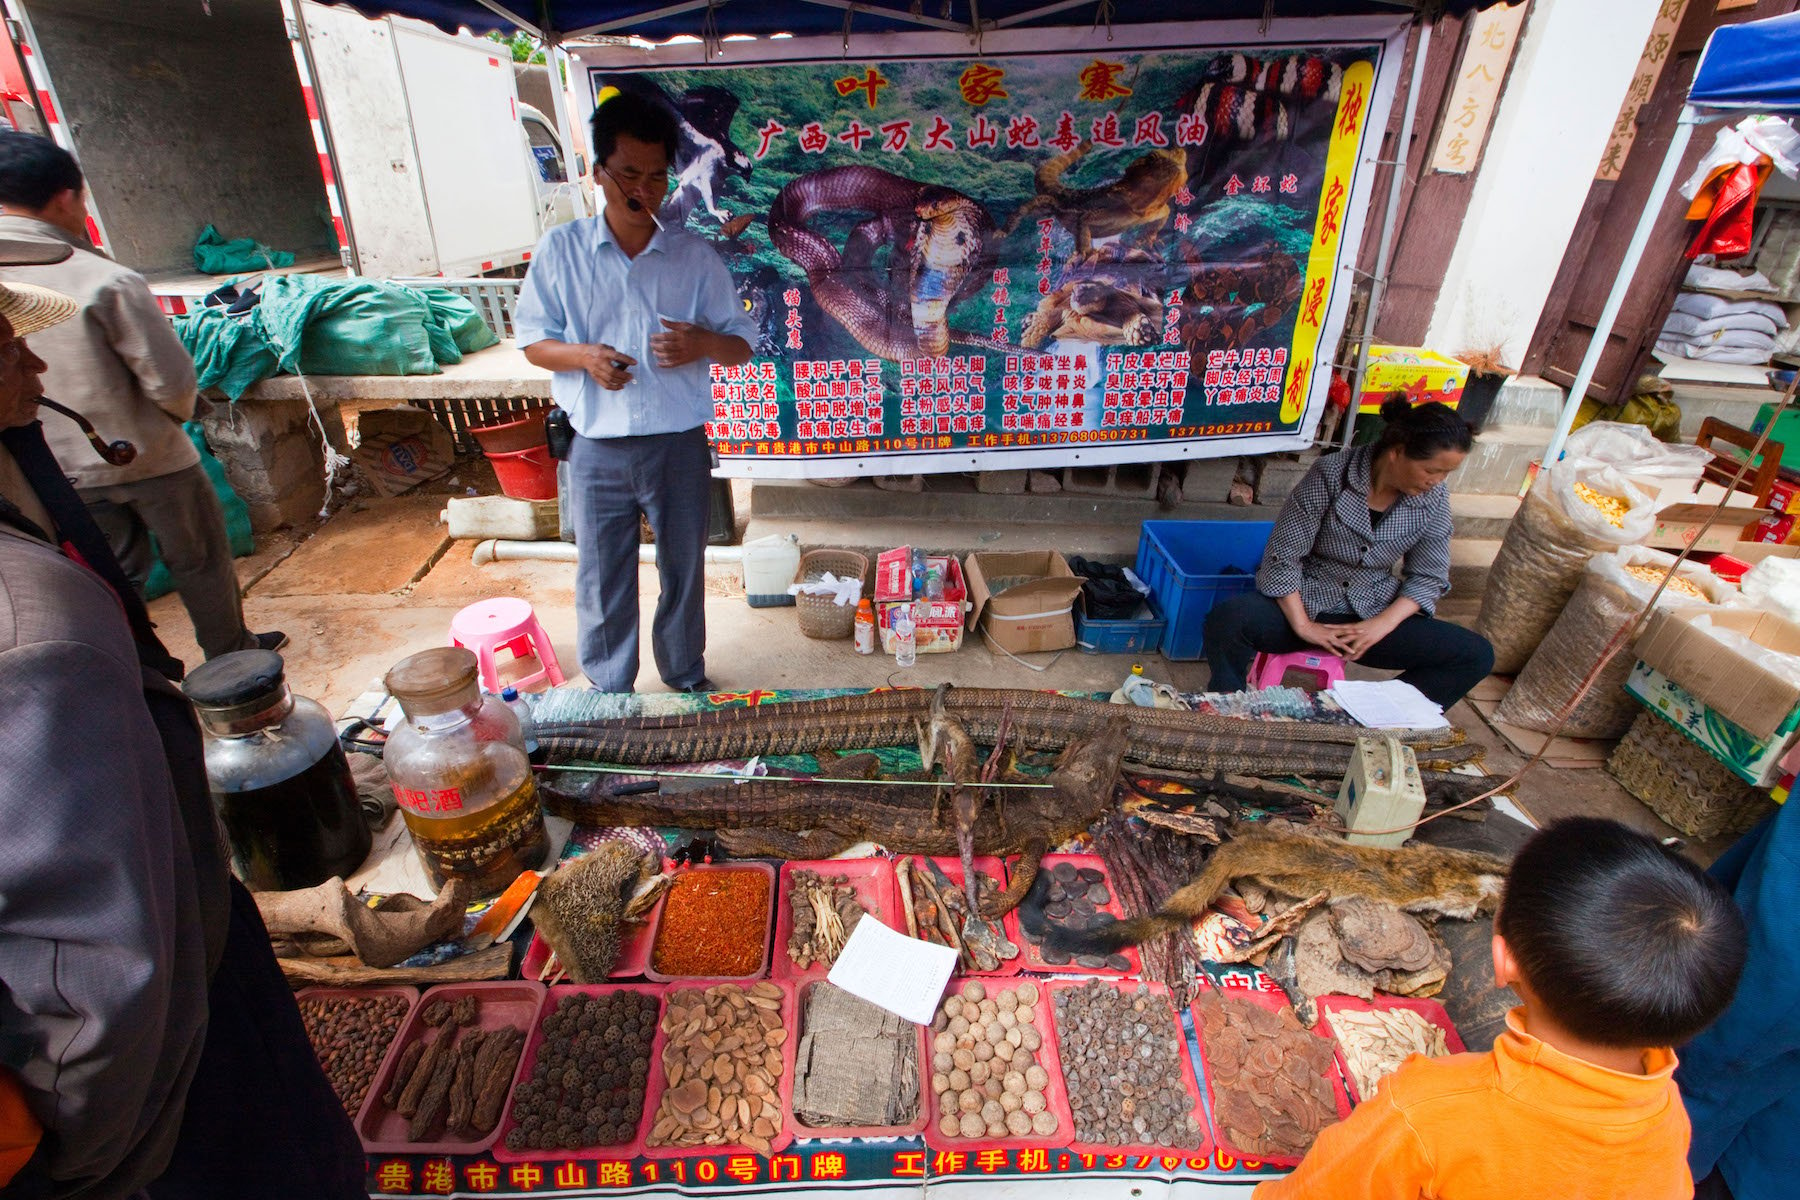 Exotic animals as traditional medicine on market day in Shaxi, Yunnan Province, China (Source: dbimages/Alamy)